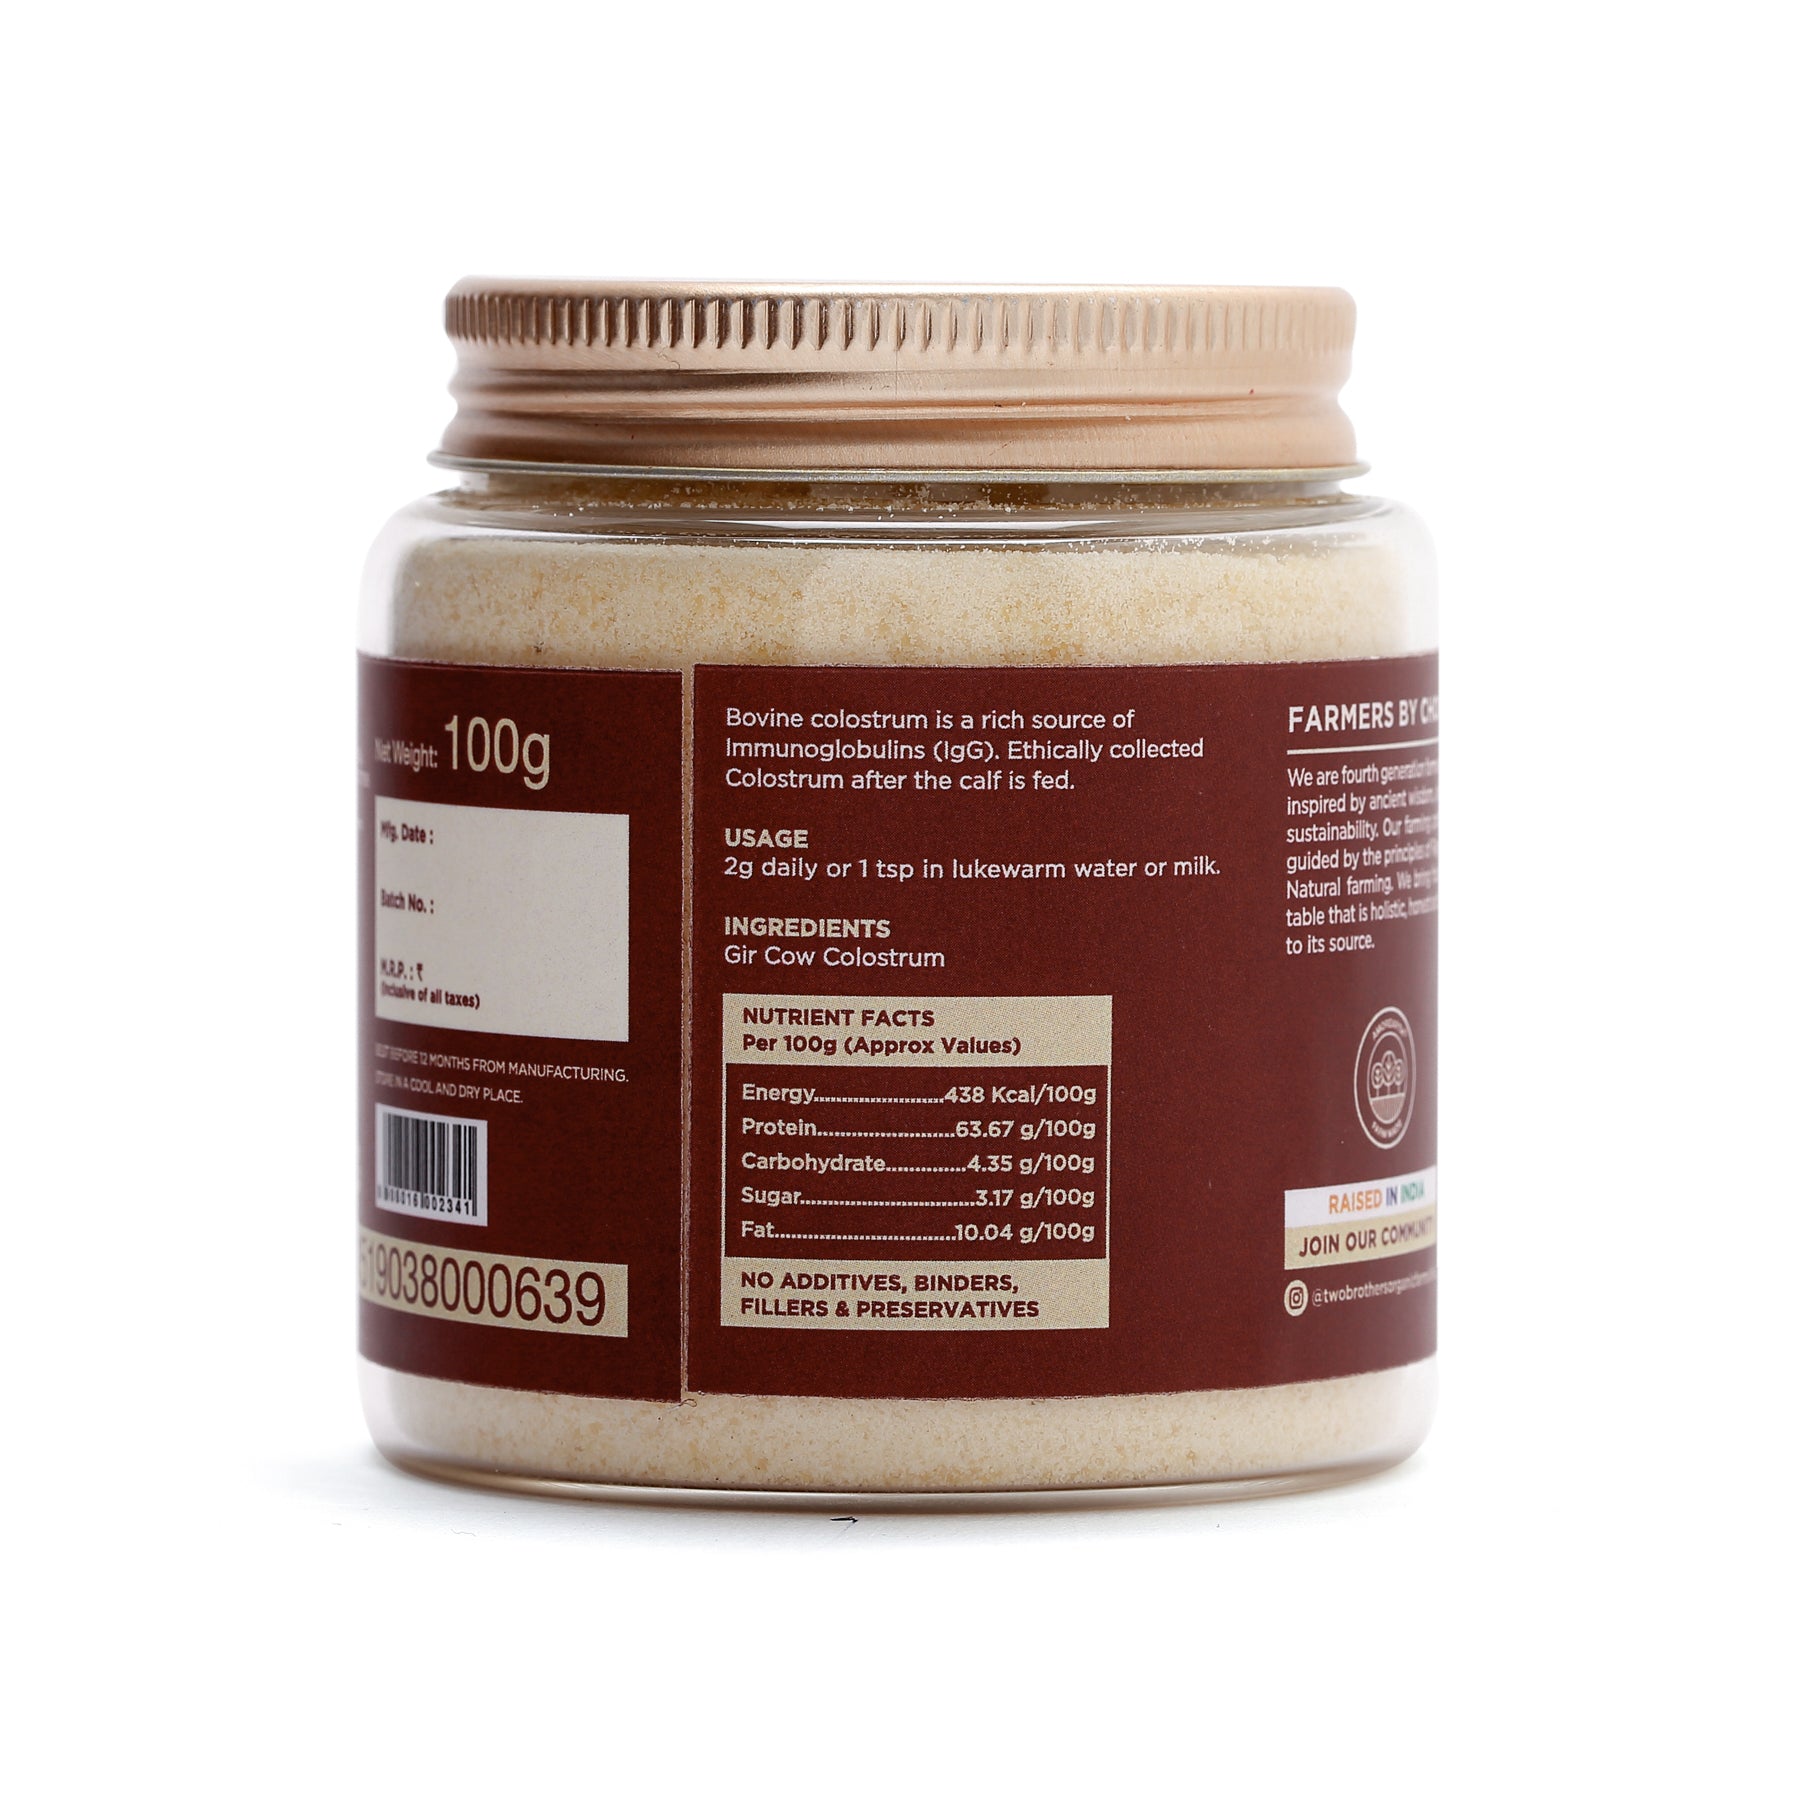 Product: Two Brothers Colostrum Powder, Desi Gir Cow 100 g